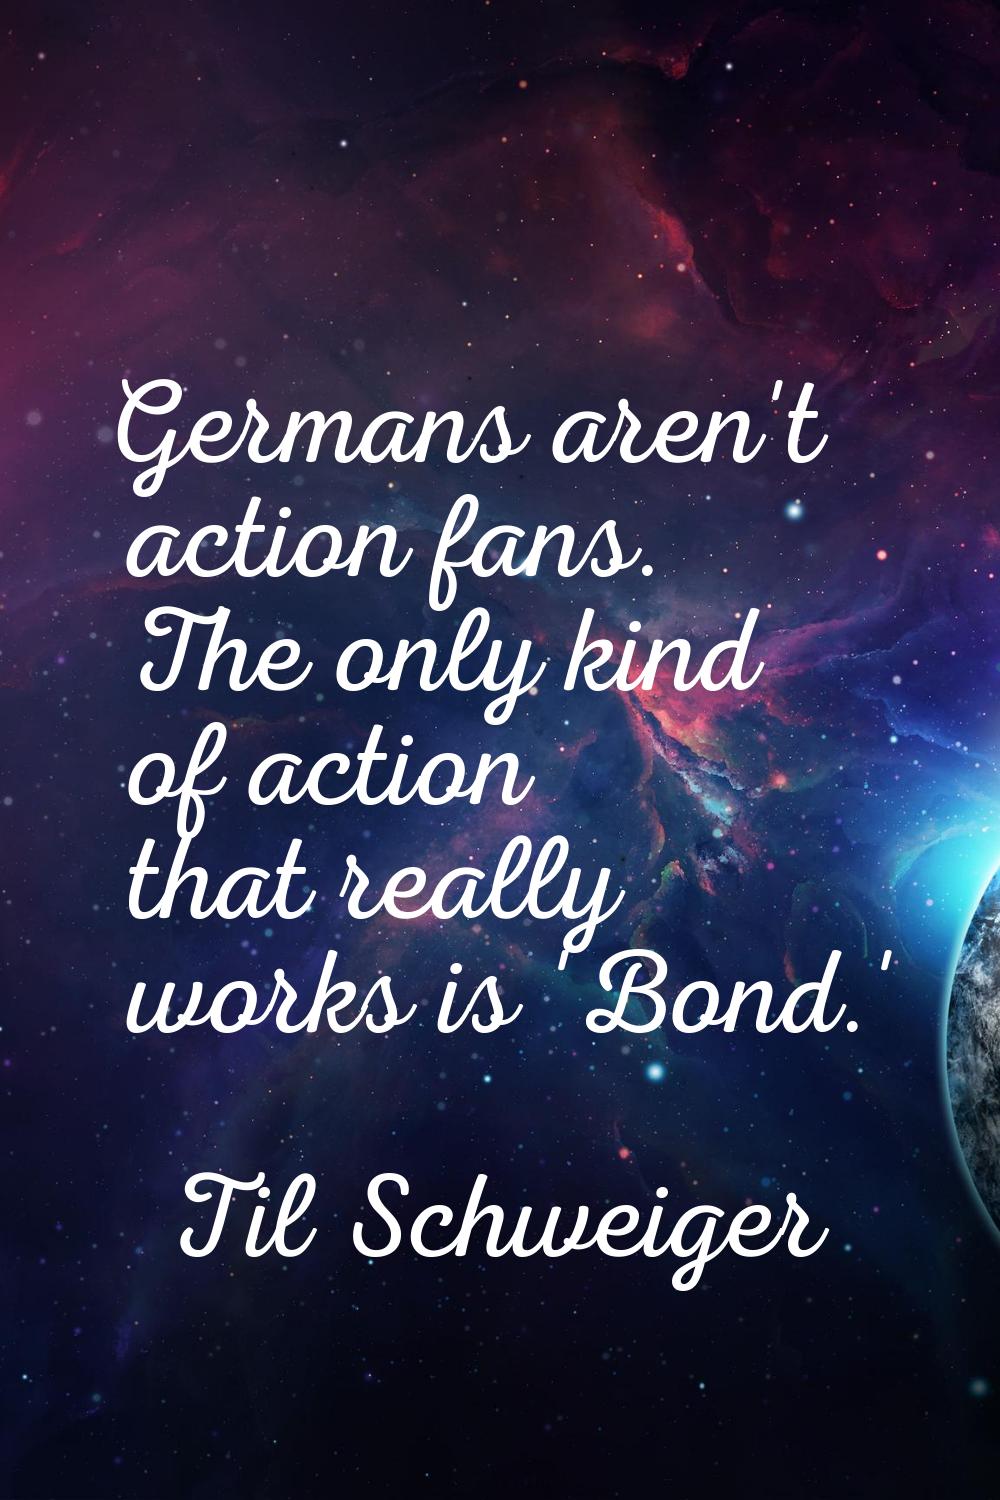 Germans aren't action fans. The only kind of action that really works is 'Bond.'